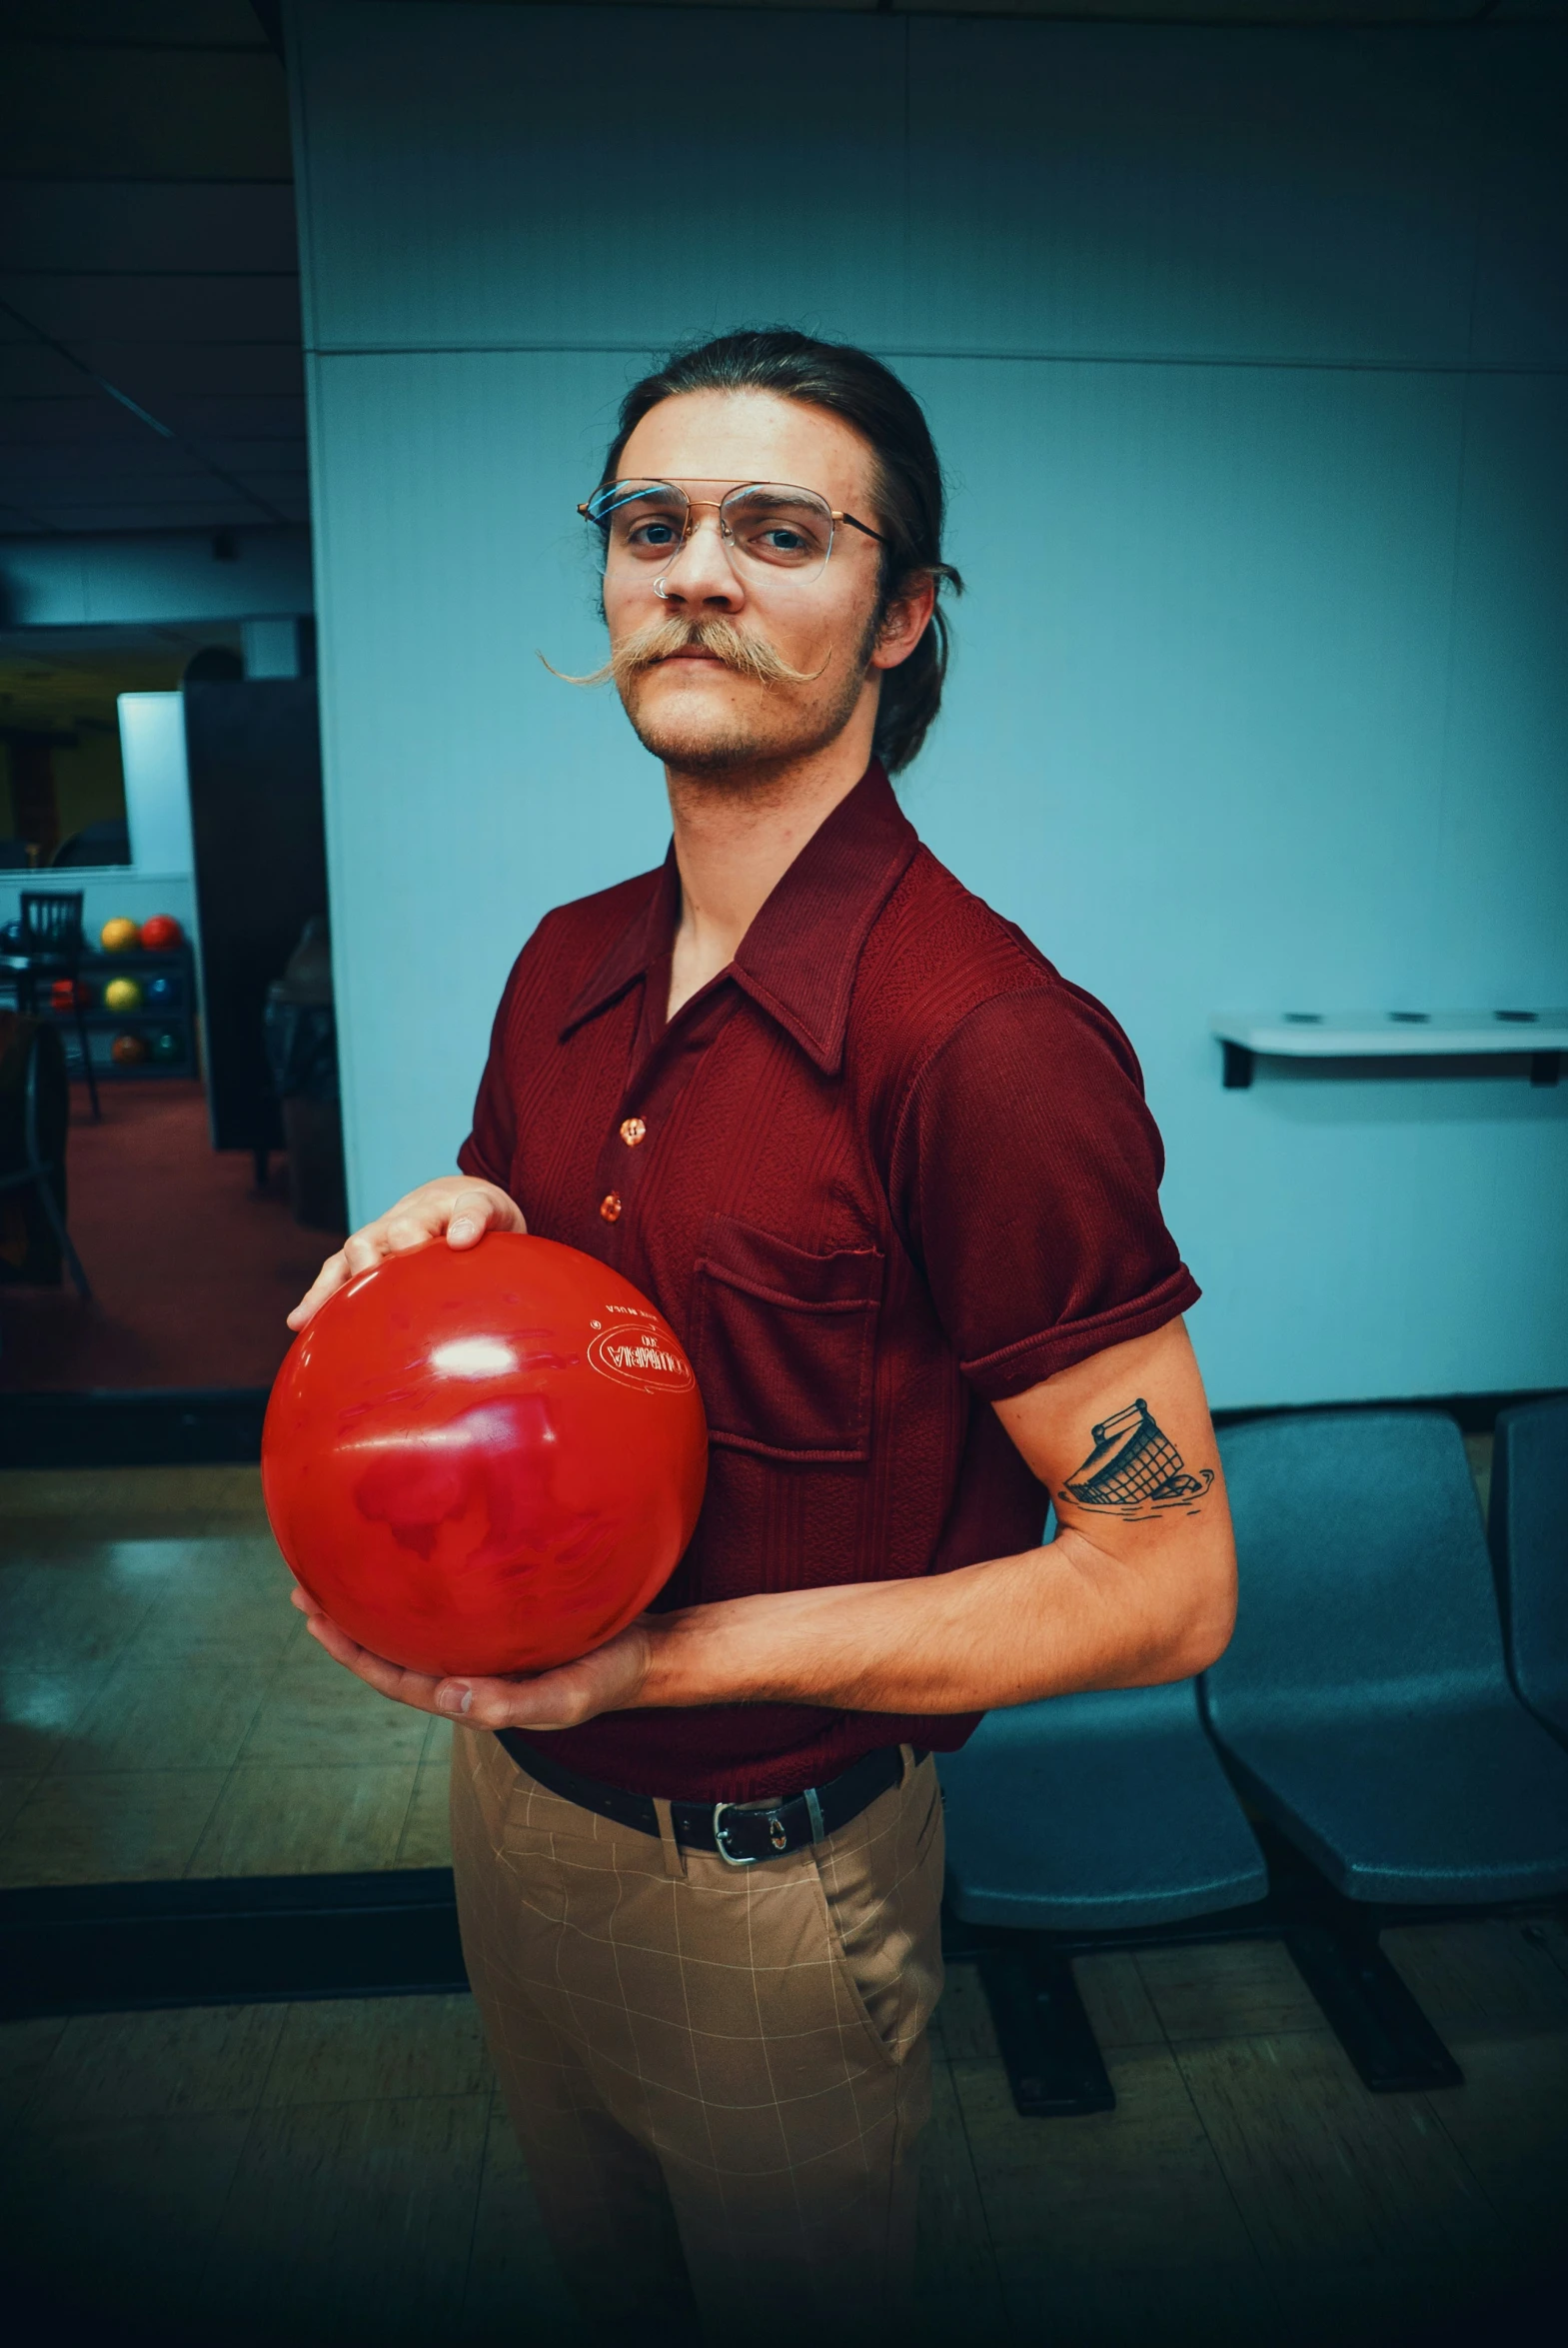 a man with glasses is holding a bowling ball